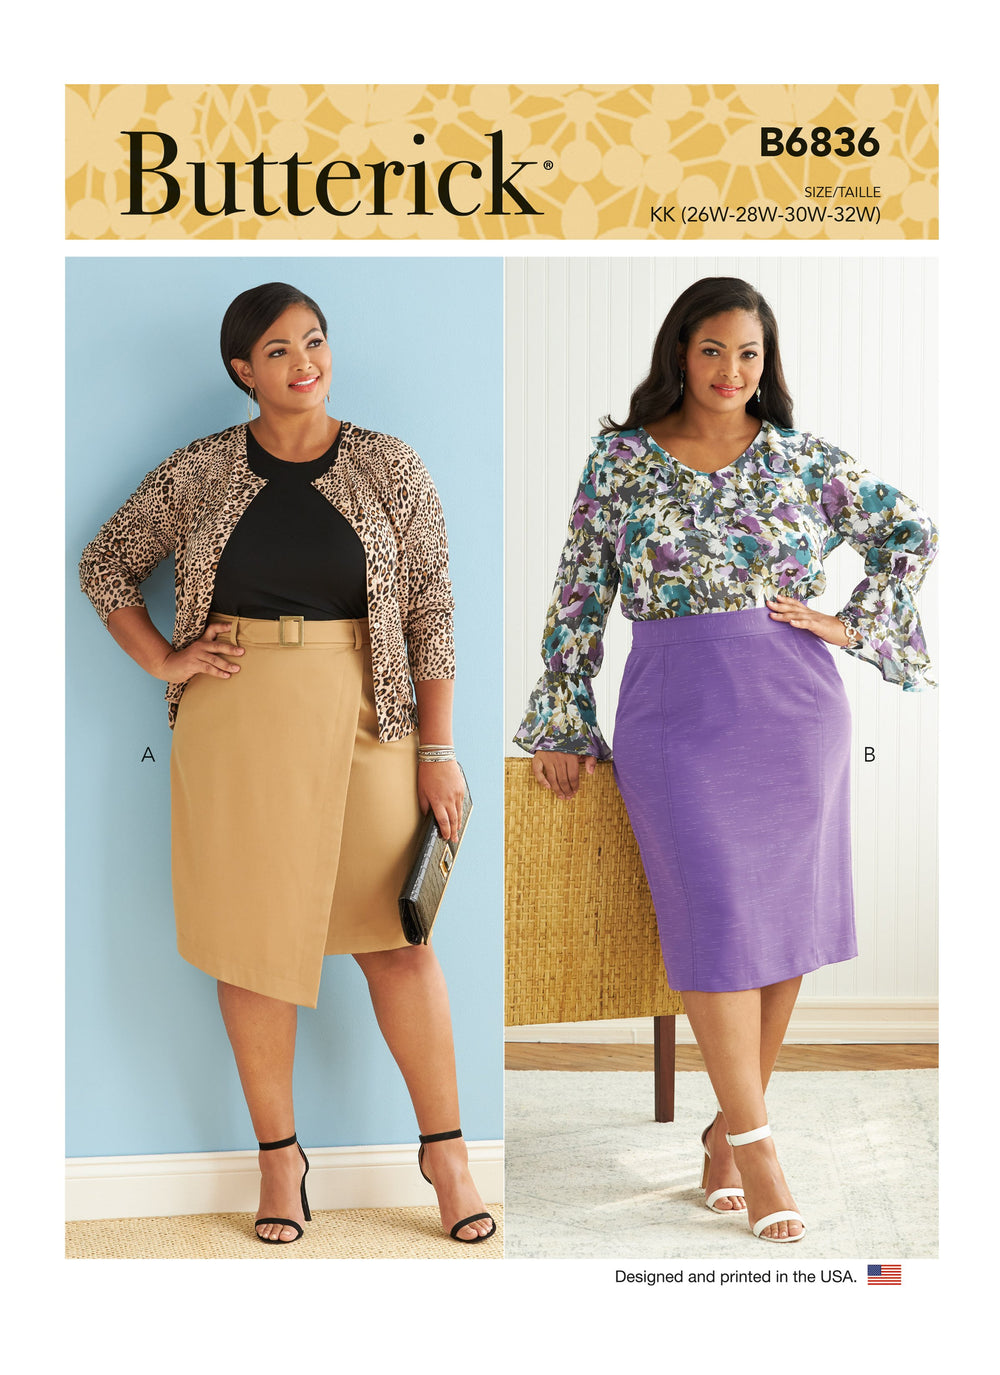 Butterick sewing pattern 6836 Women's Skirt and Belt from Jaycotts Sewing Supplies